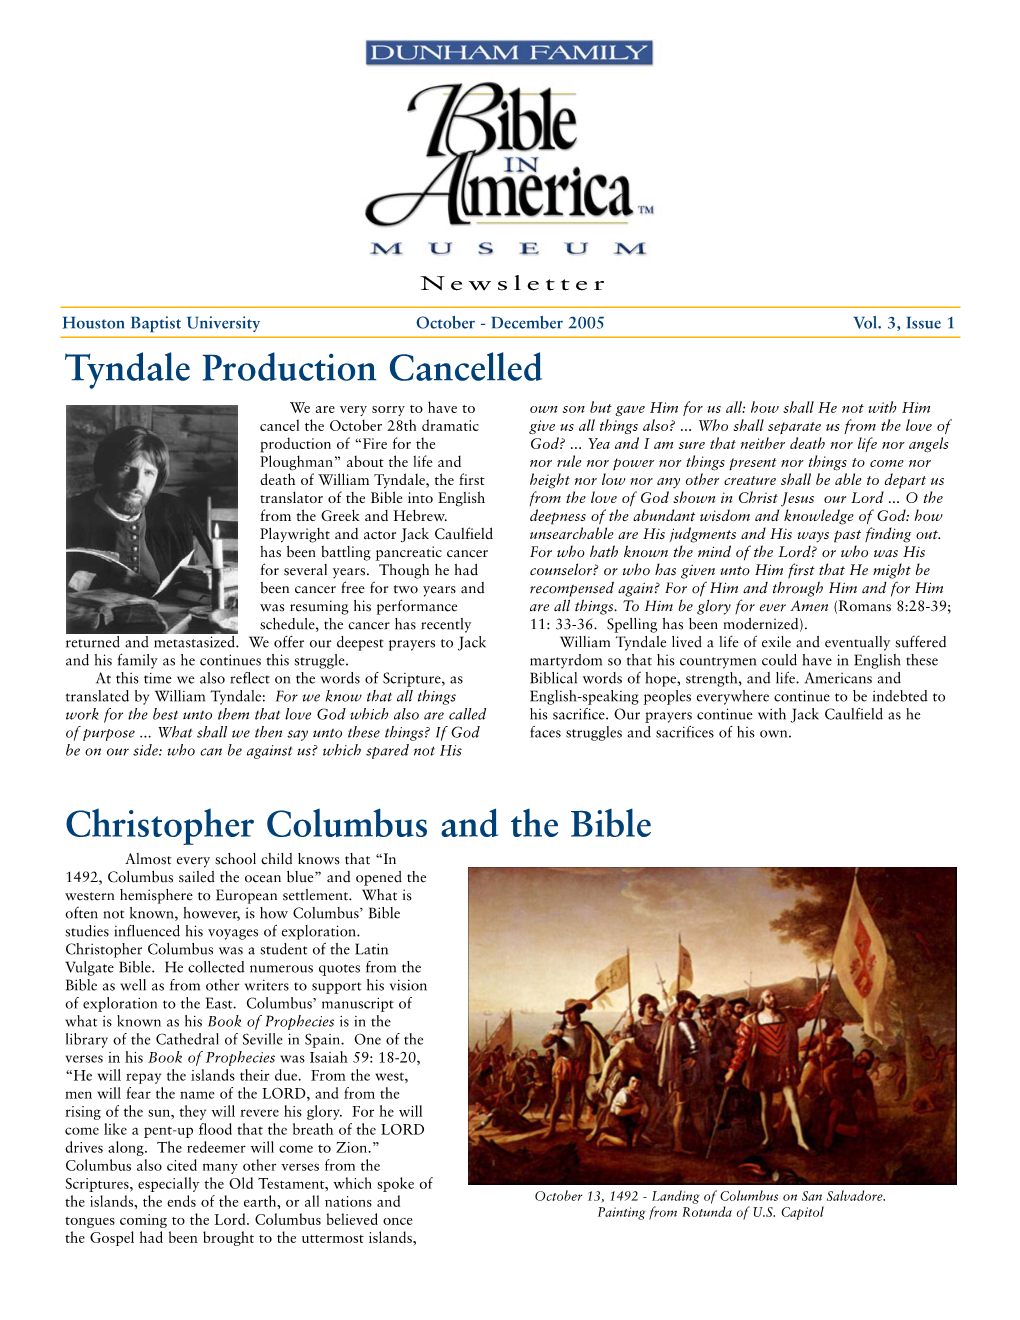 Christopher Columbus and the Bible Tyndale Production Cancelled